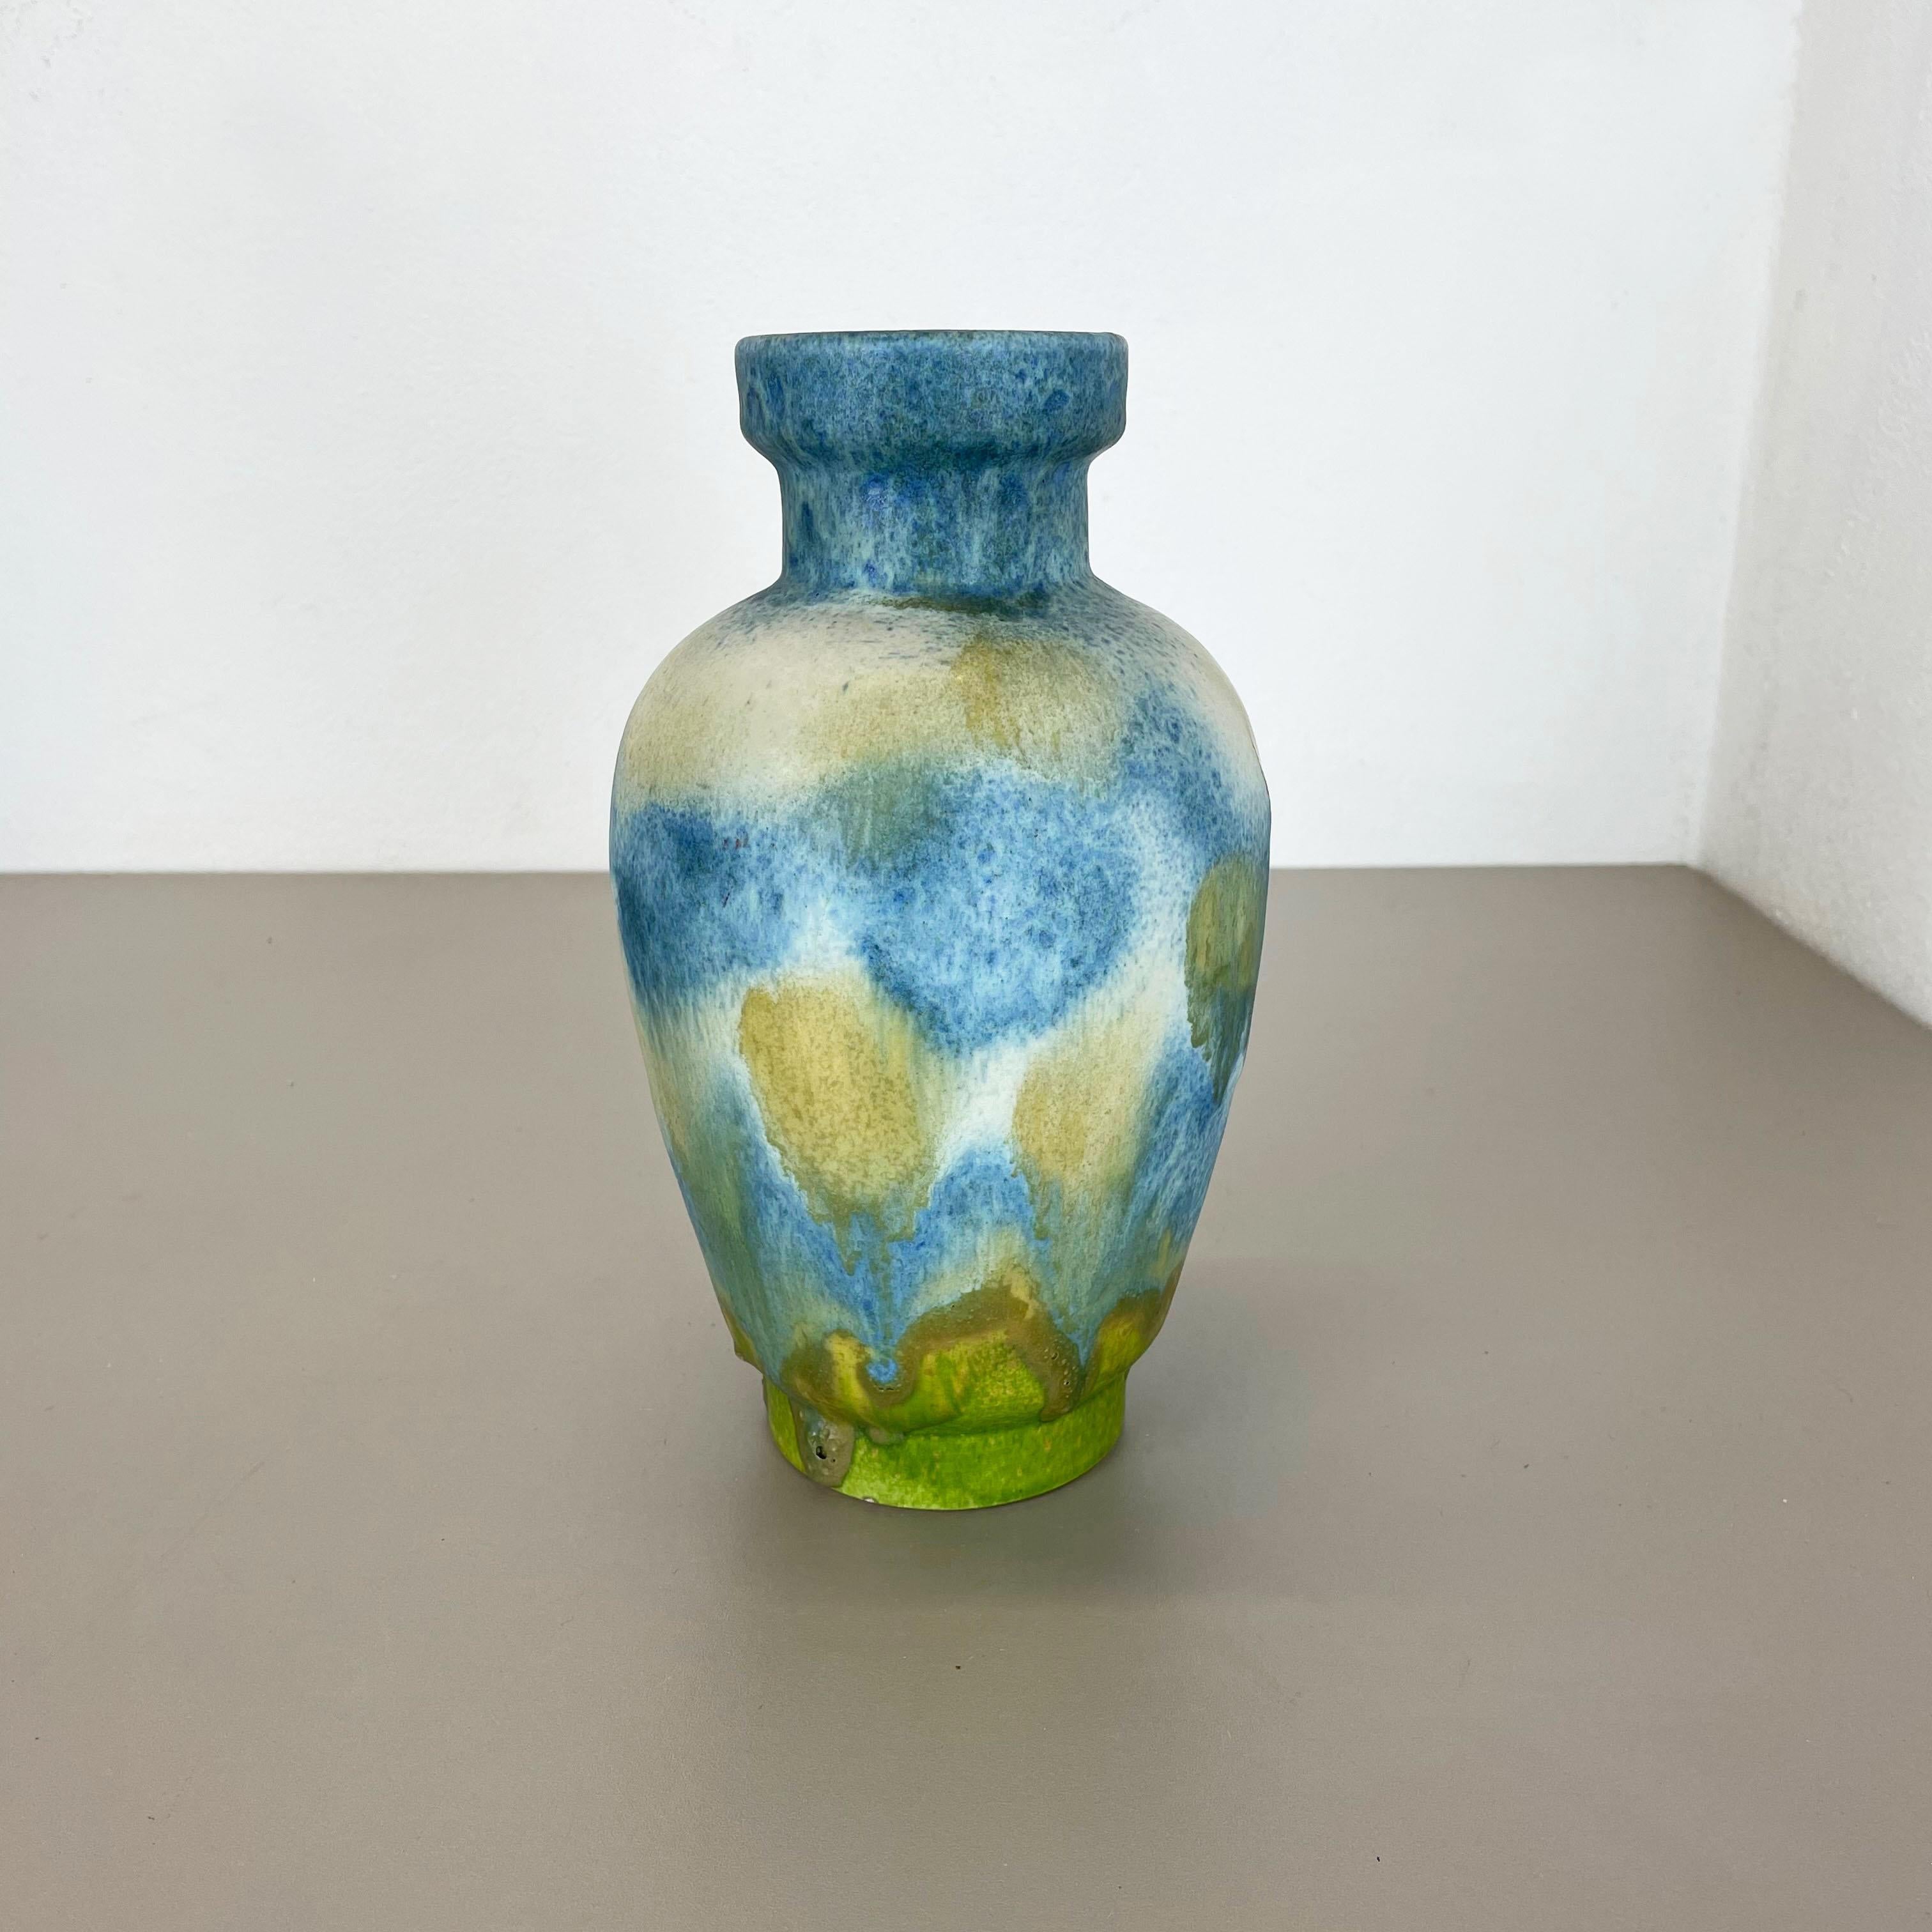 Article:

Pottery ceramic vase 


Producer:

Dümmler and Breiden, Germany


Decade:

1970s





Original vintage 1970s pottery ceramic vase made in Germany. High quality German production with a nice abstract coloration. The vase was designed and